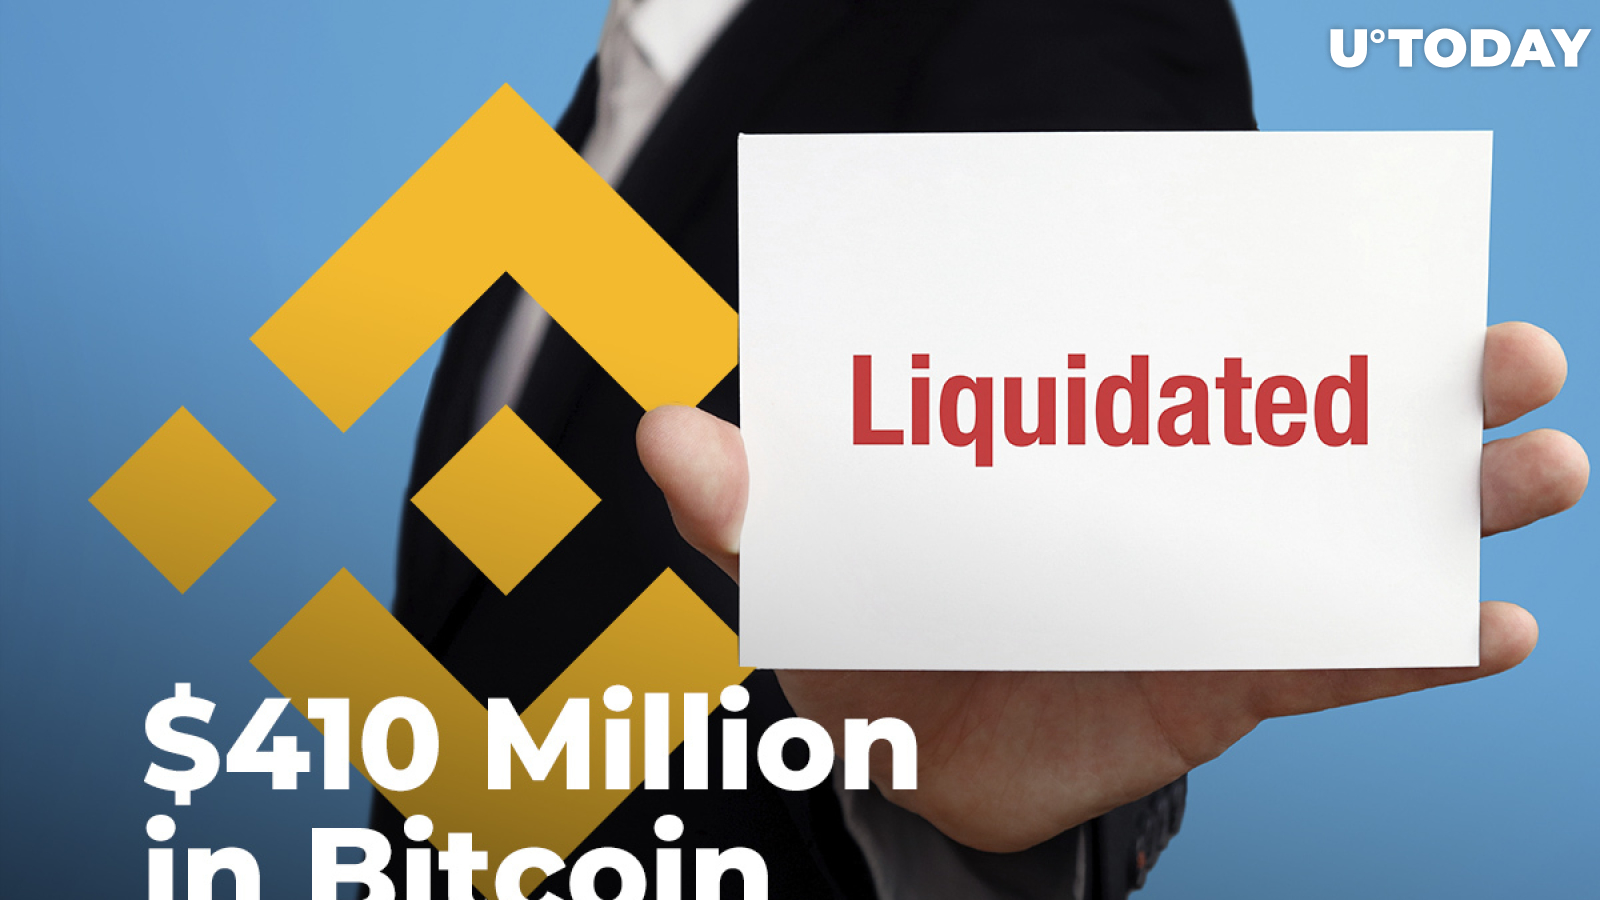 $410 Million in Bitcoin Futures Liquidated on Binance – Largest Daily Value to Date